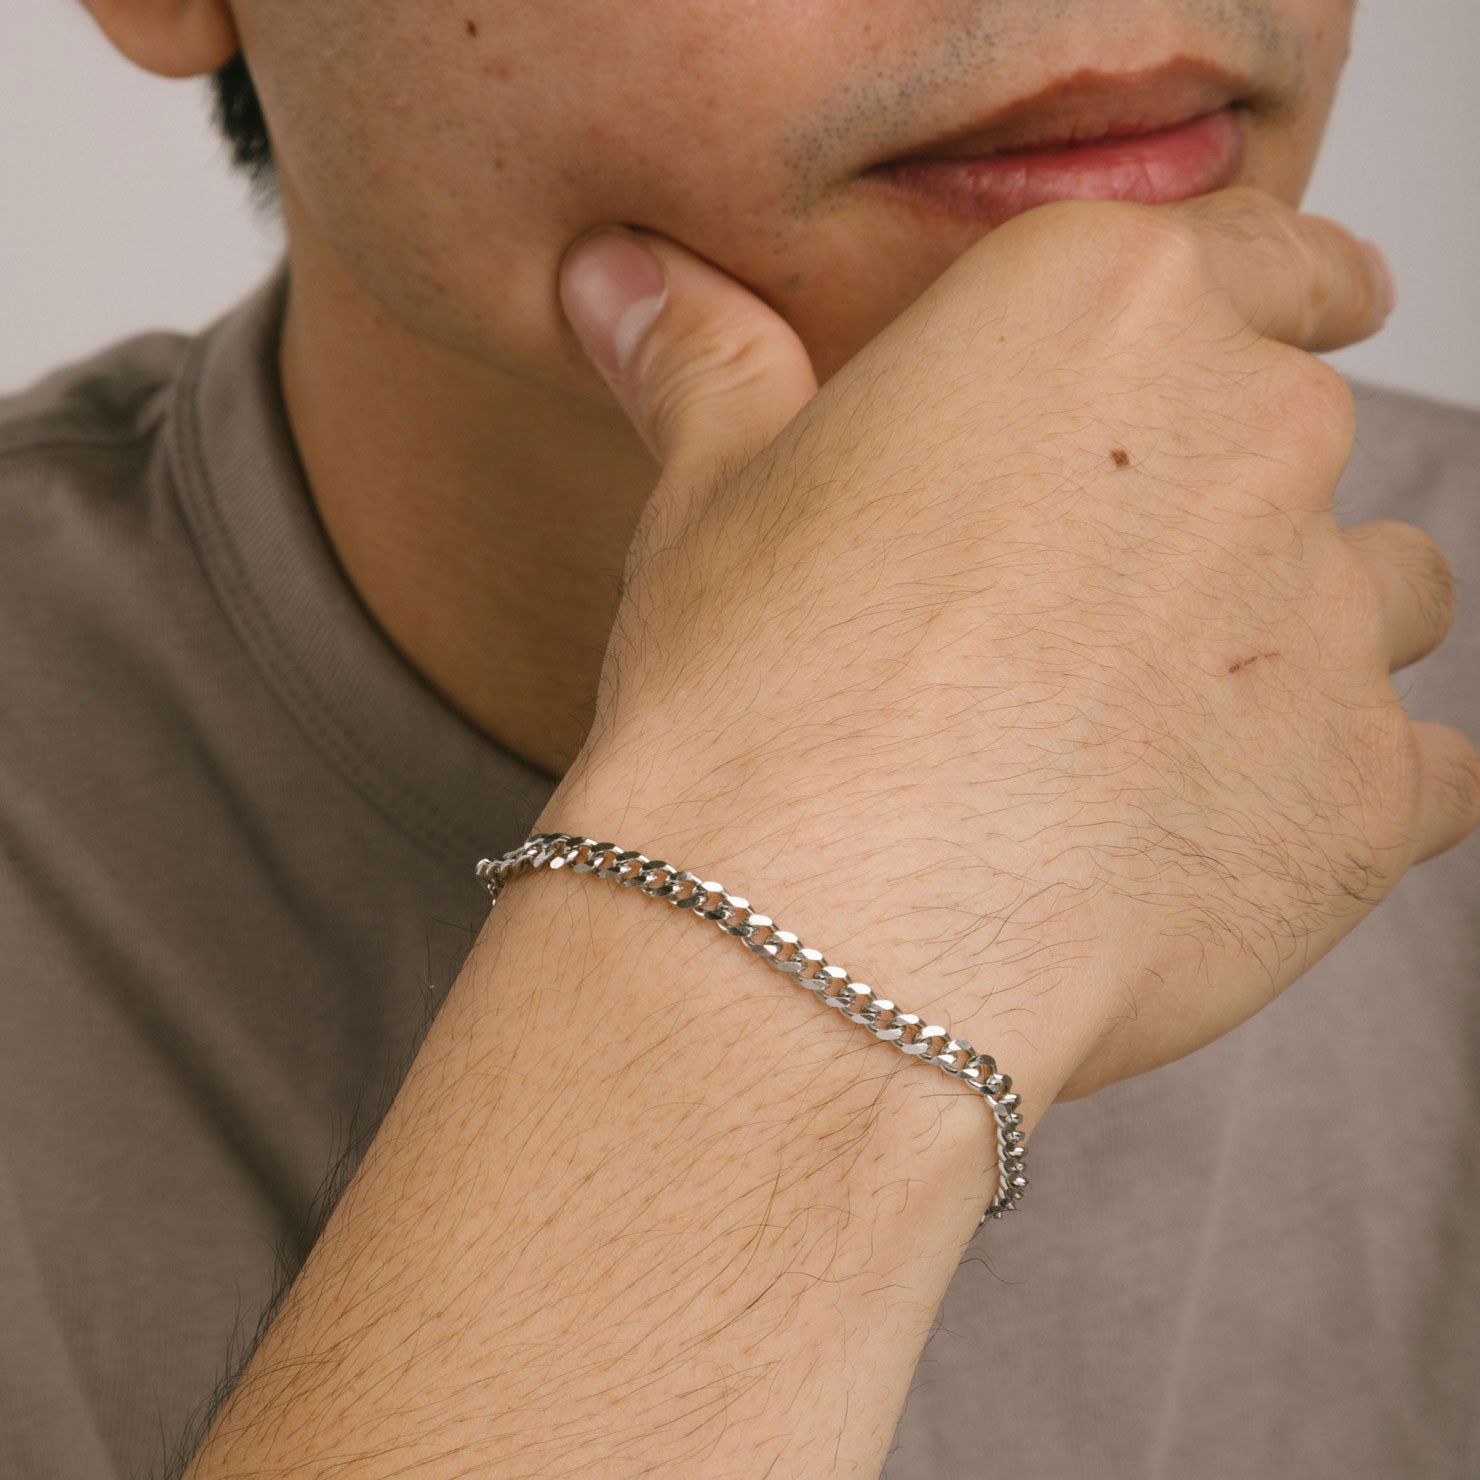 A model wearing the Cuban Chain Bracelet is made of durable stainless steel, and offers a non-tarnish finish and water resistance.